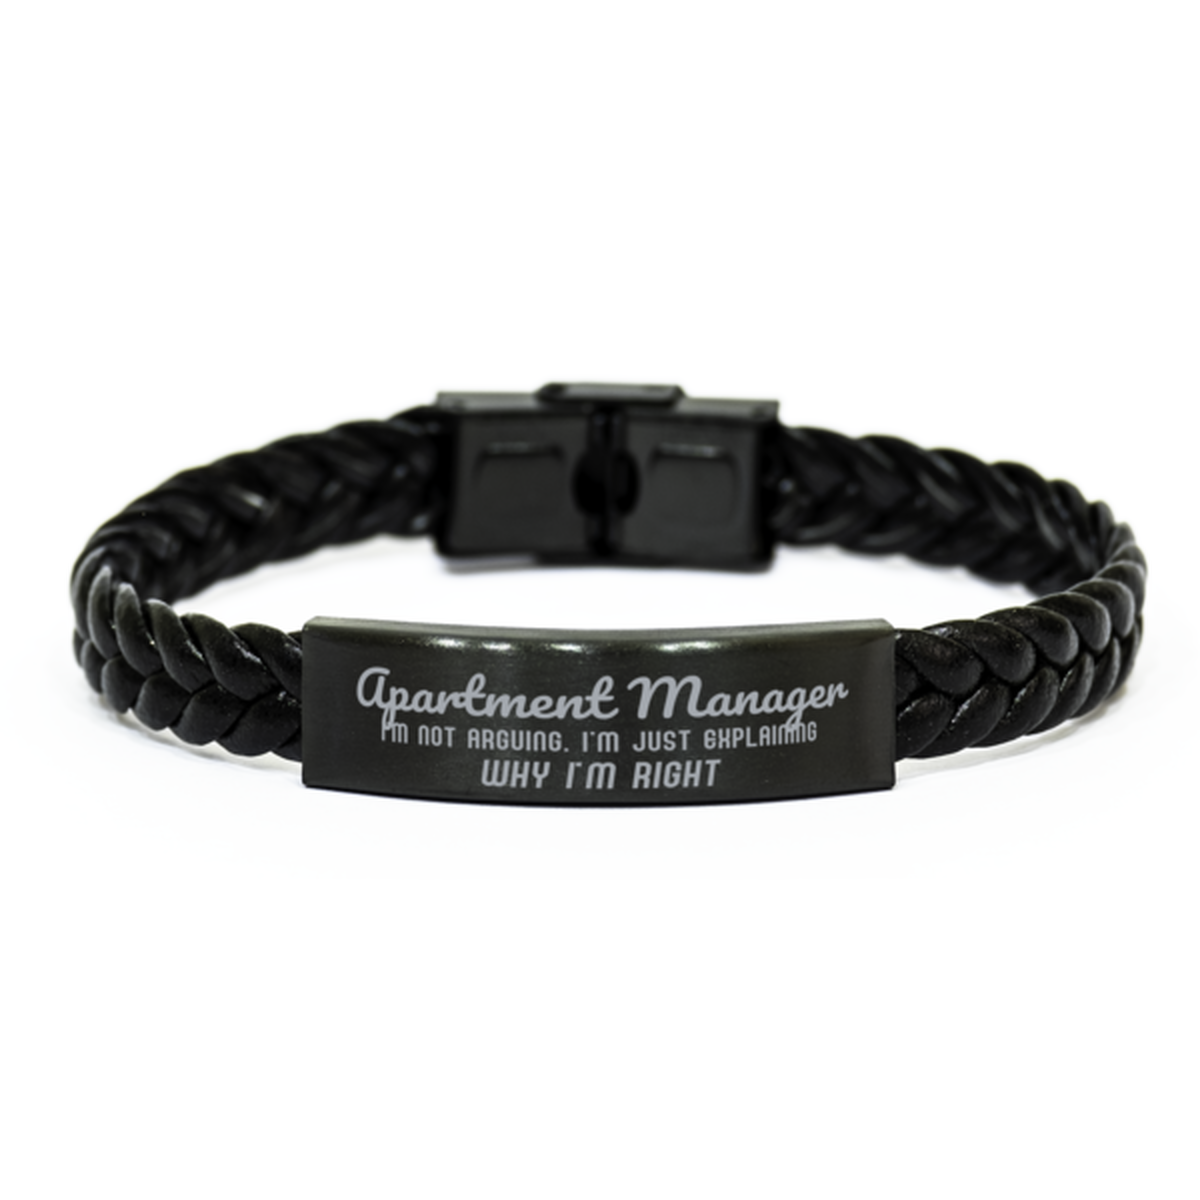 Apartment Manager I'm not Arguing. I'm Just Explaining Why I'm RIGHT Braided Leather Bracelet, Graduation Birthday Christmas Apartment Manager Gifts For Apartment Manager Funny Saying Quote Present for Men Women Coworker